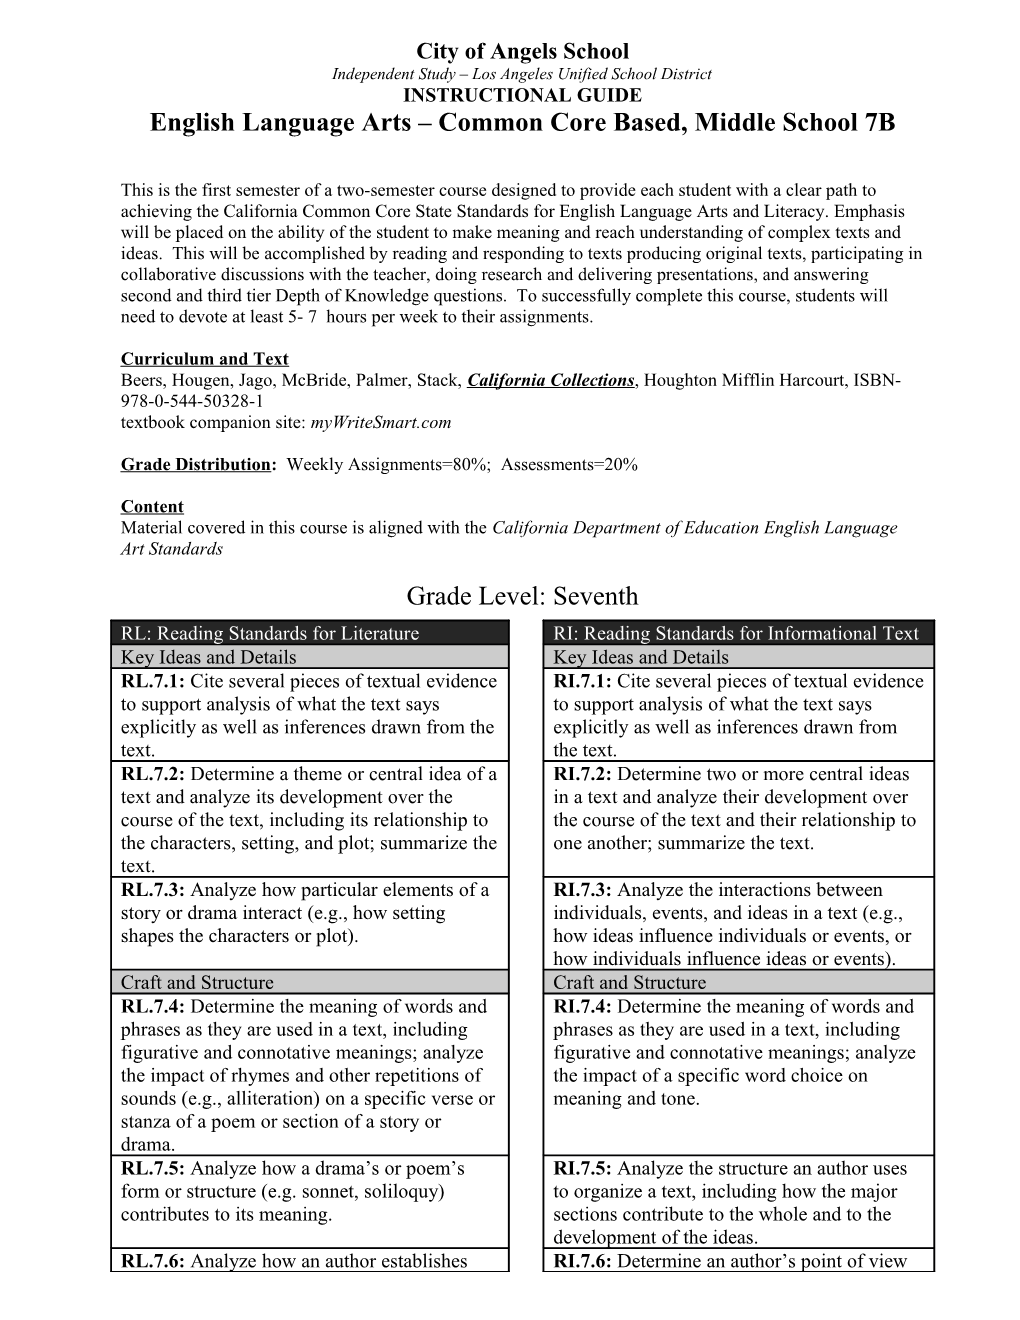 ELA Instructional Guide for 7B City of Angels School LAUSD Independent Study